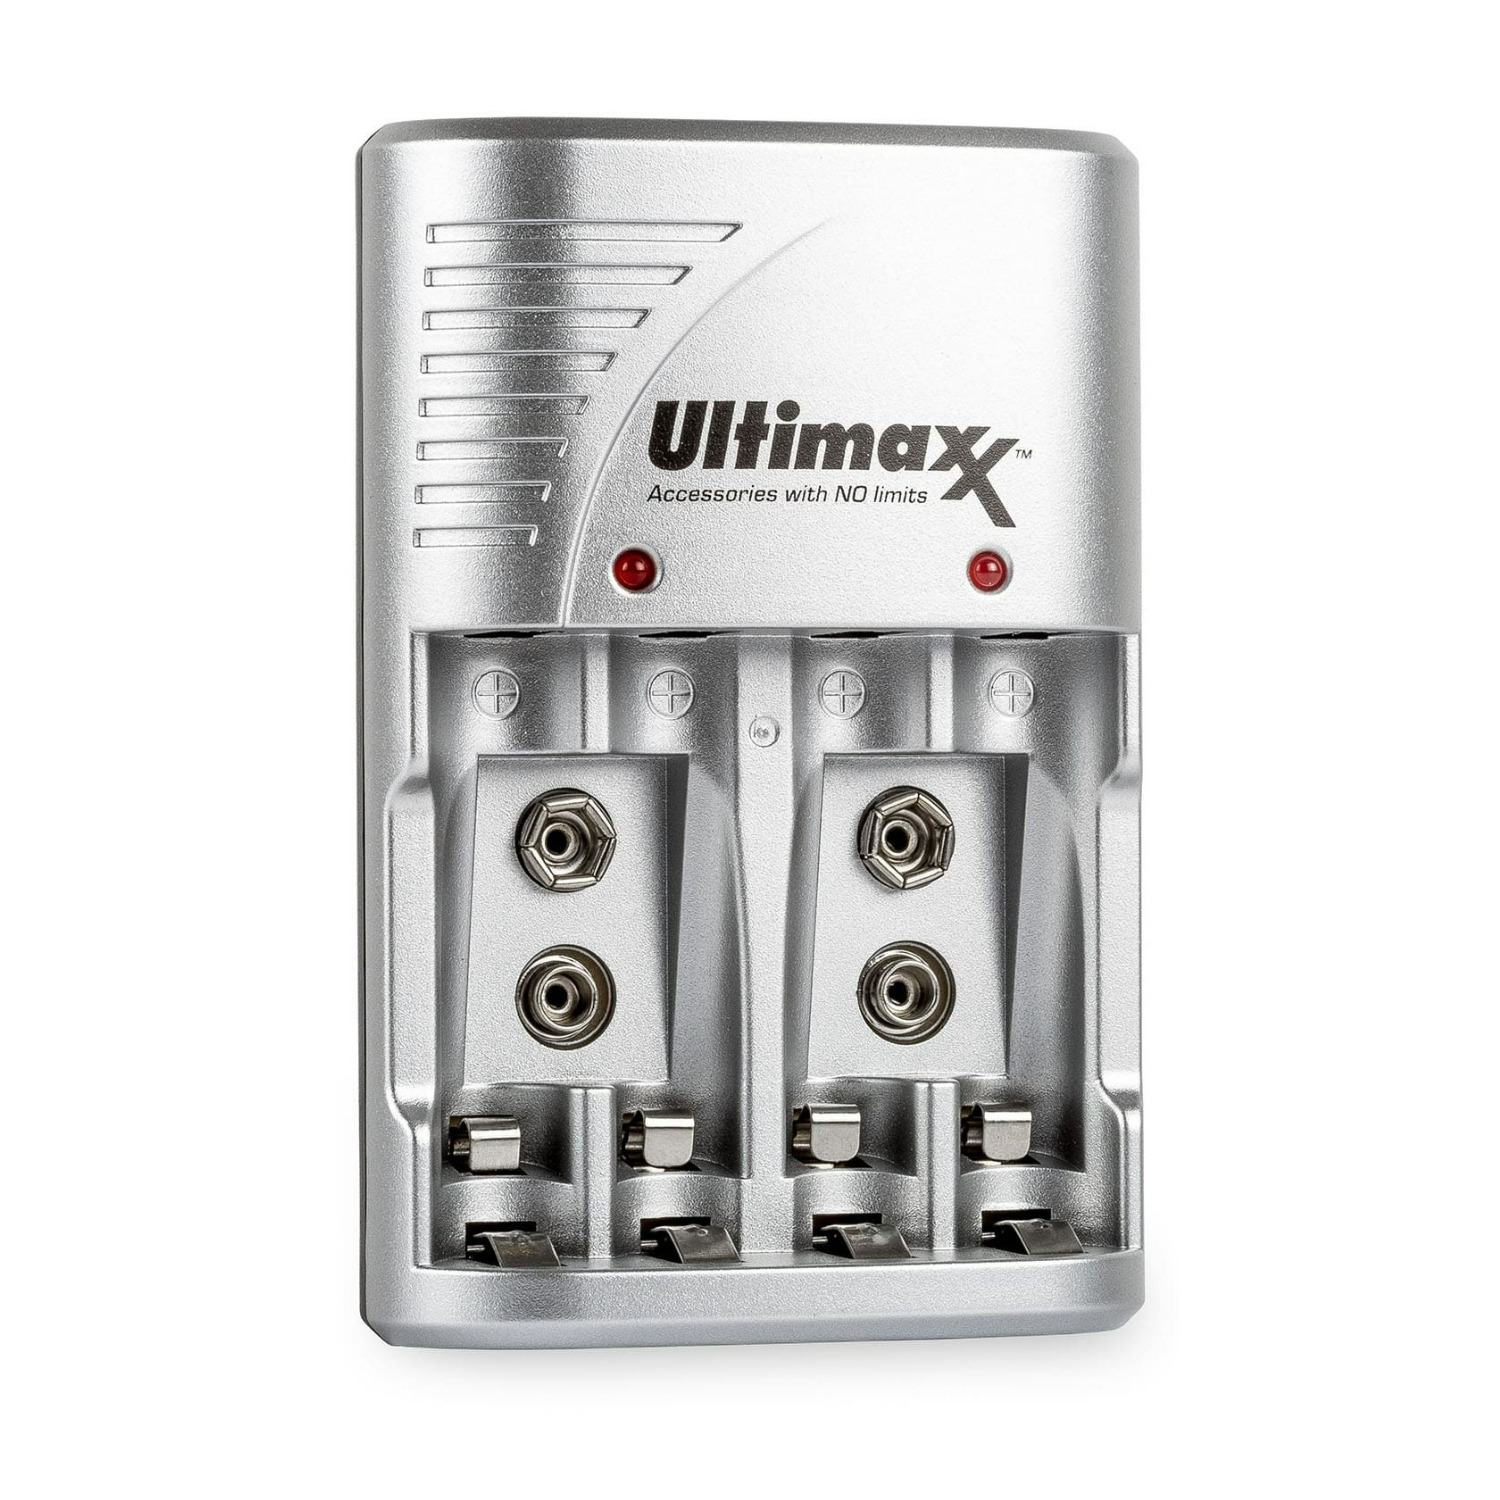 Ultimaxx 4 Port Rapid Charger with 4 AA 1.2V 3150mAh Memory Free Rechargeable Ni-MH Batteries in Silver -  UM-CH-4AA-3150WS